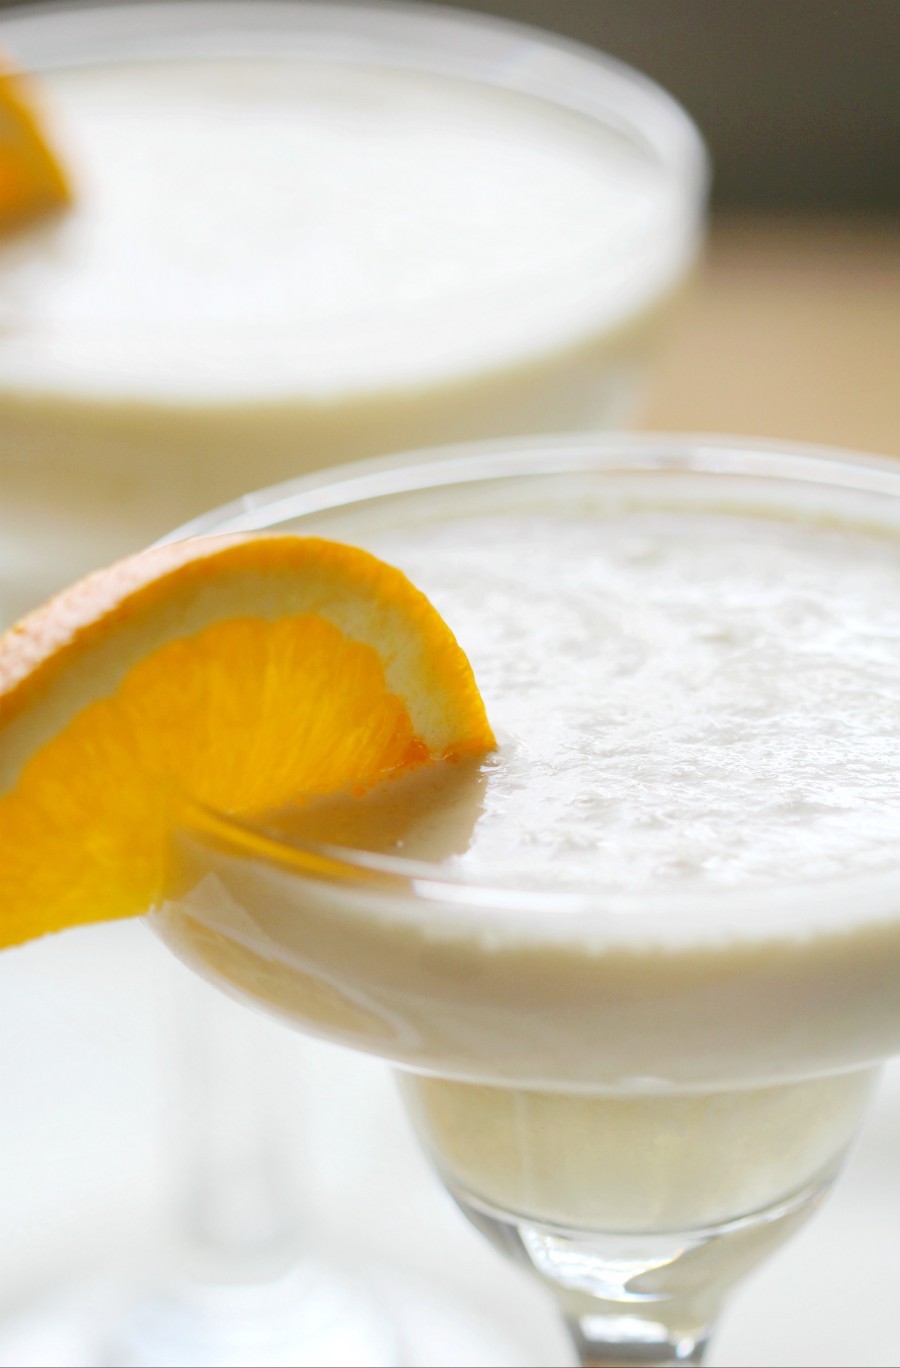 4-Ingredient Orange Julius Cocktail (Gluten-Free, Vegan) | Strength and Sunshine @RebeccaGF666 Give your Orange Julius a grown-up boozy twist! A quick and easy 4-Ingredient Orange Julius Cocktail recipe that's gluten-free, vegan, and makes for a perfect frozen, creamy, and fruit treat! A sippable Creamsicle for adults only! #orangejulius #creamsicle #cocktail #glutenfree #vegan 